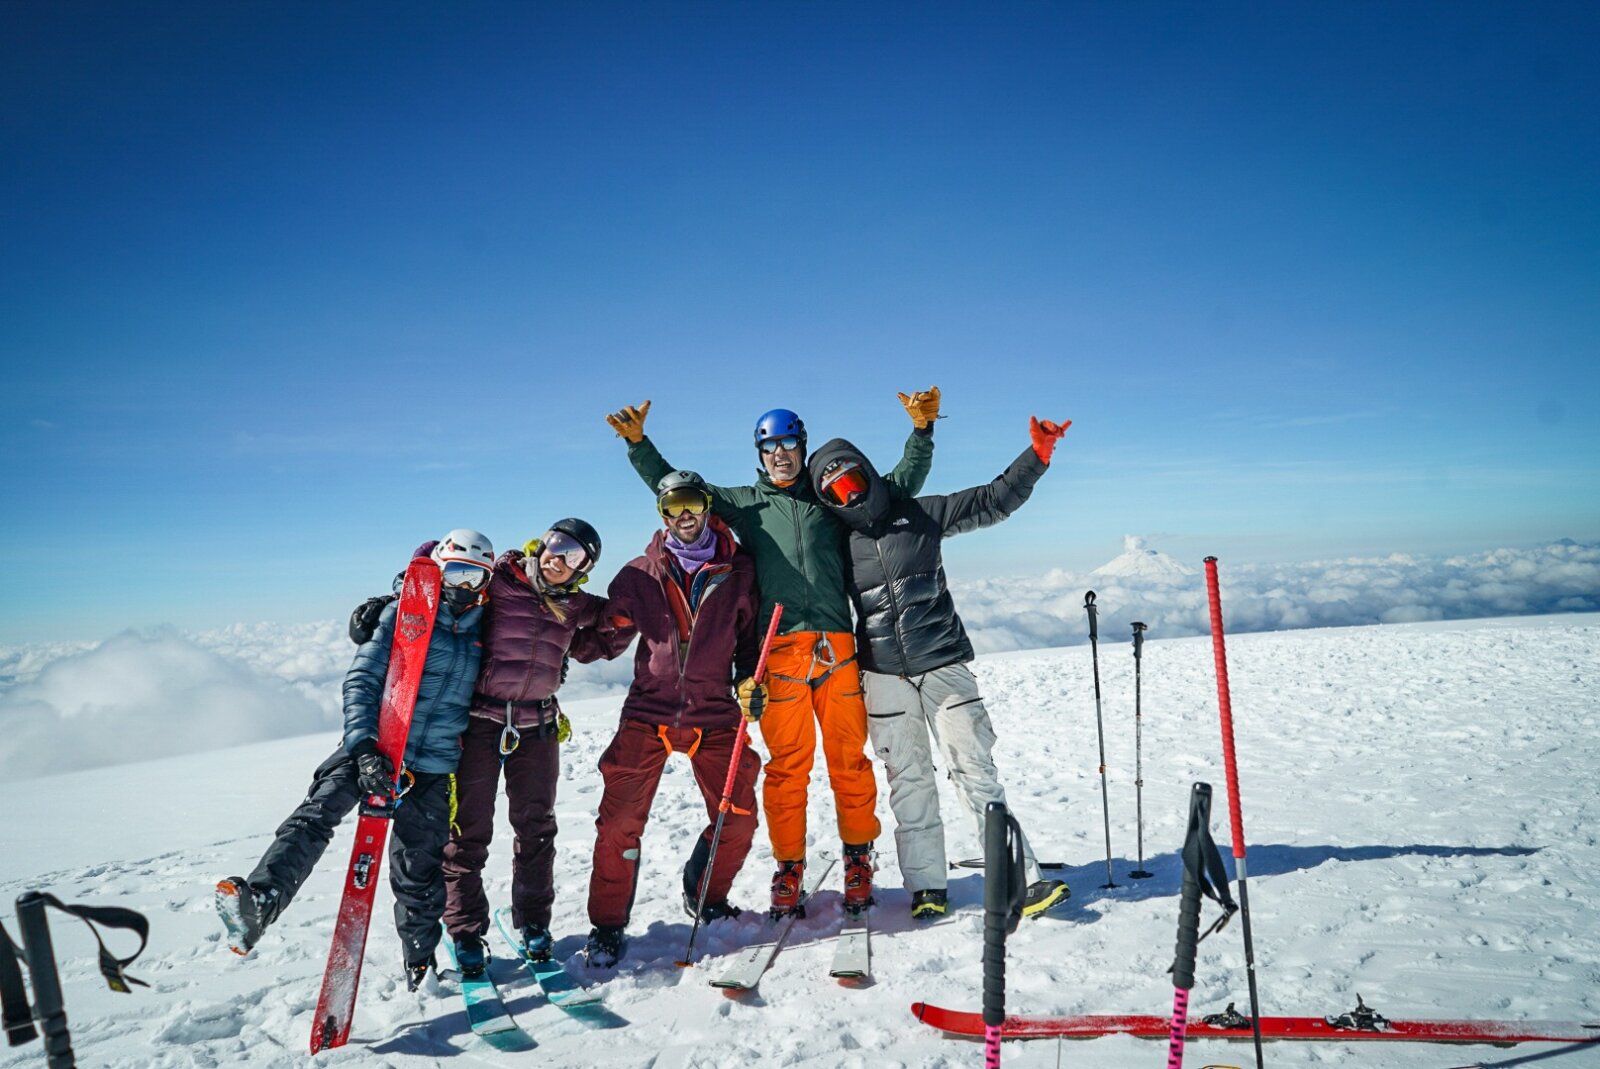 Professionally guided ski mountaineering trips to the volcanoes of Ecuador.